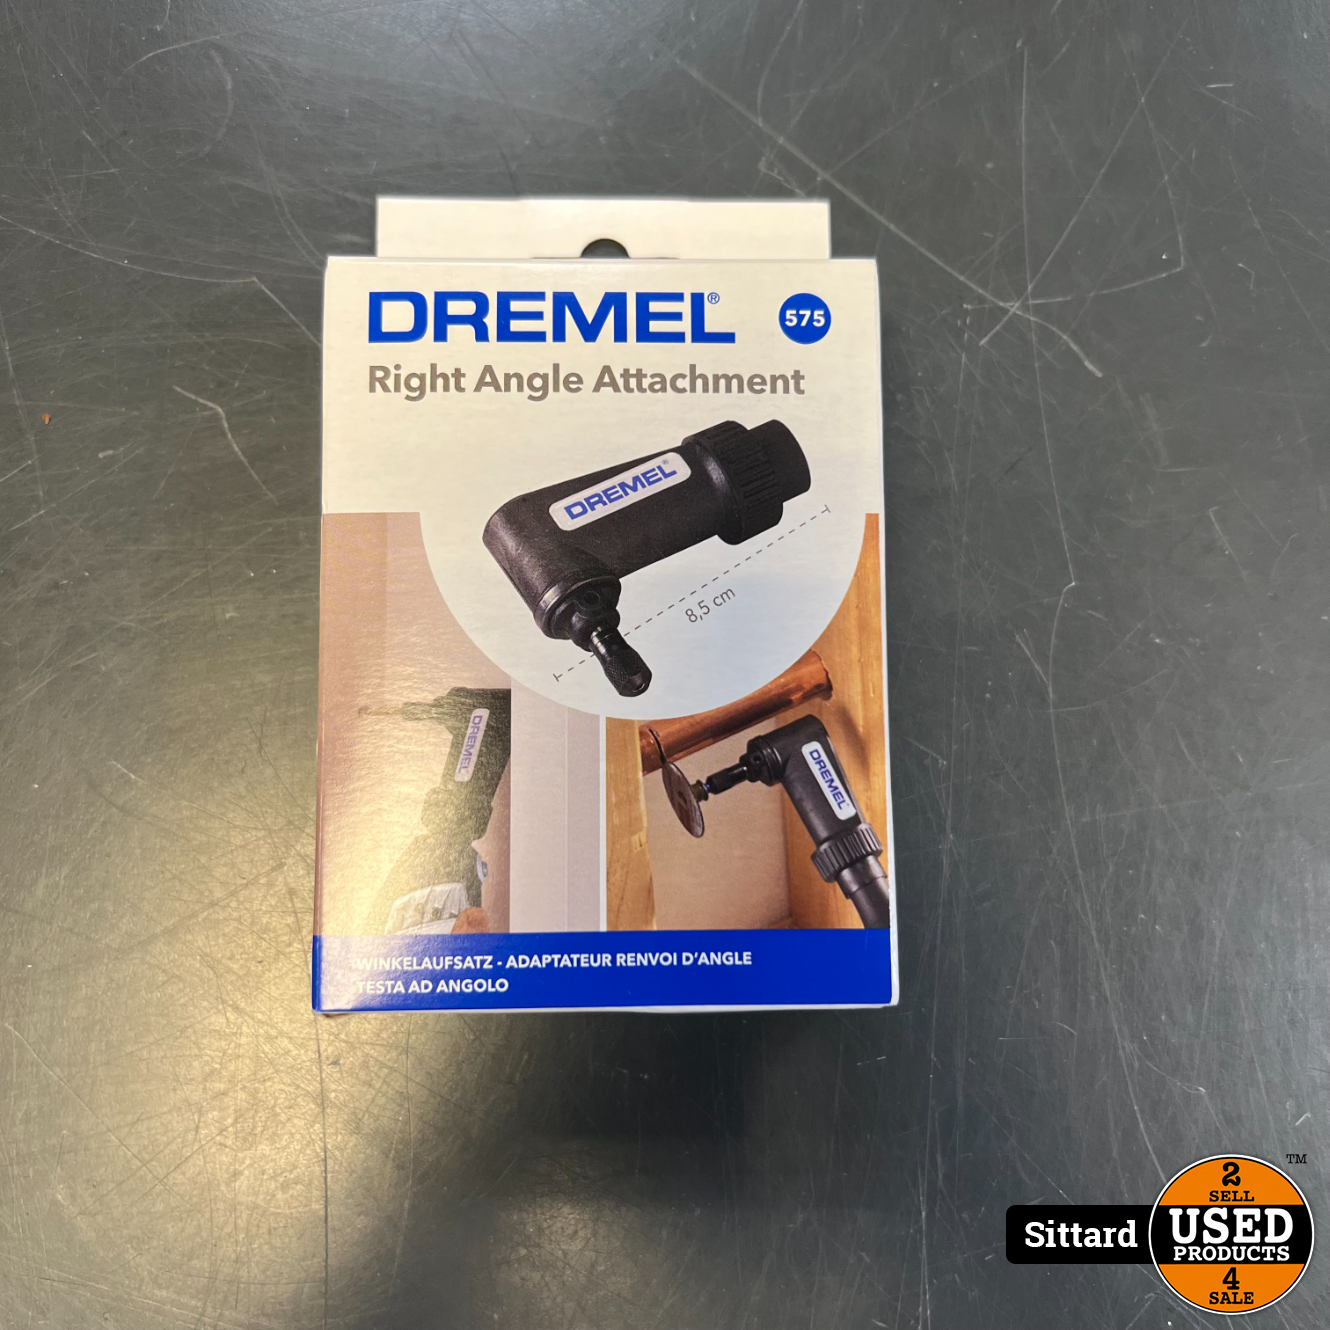 elegant Pluche pop Seminarie Dremel 8220 + Accu en acculader, 150 Accessoire set + Wide angle  attachment, In nieuwstaat, | Nwpr 189,- Euro - Used Products Sittard